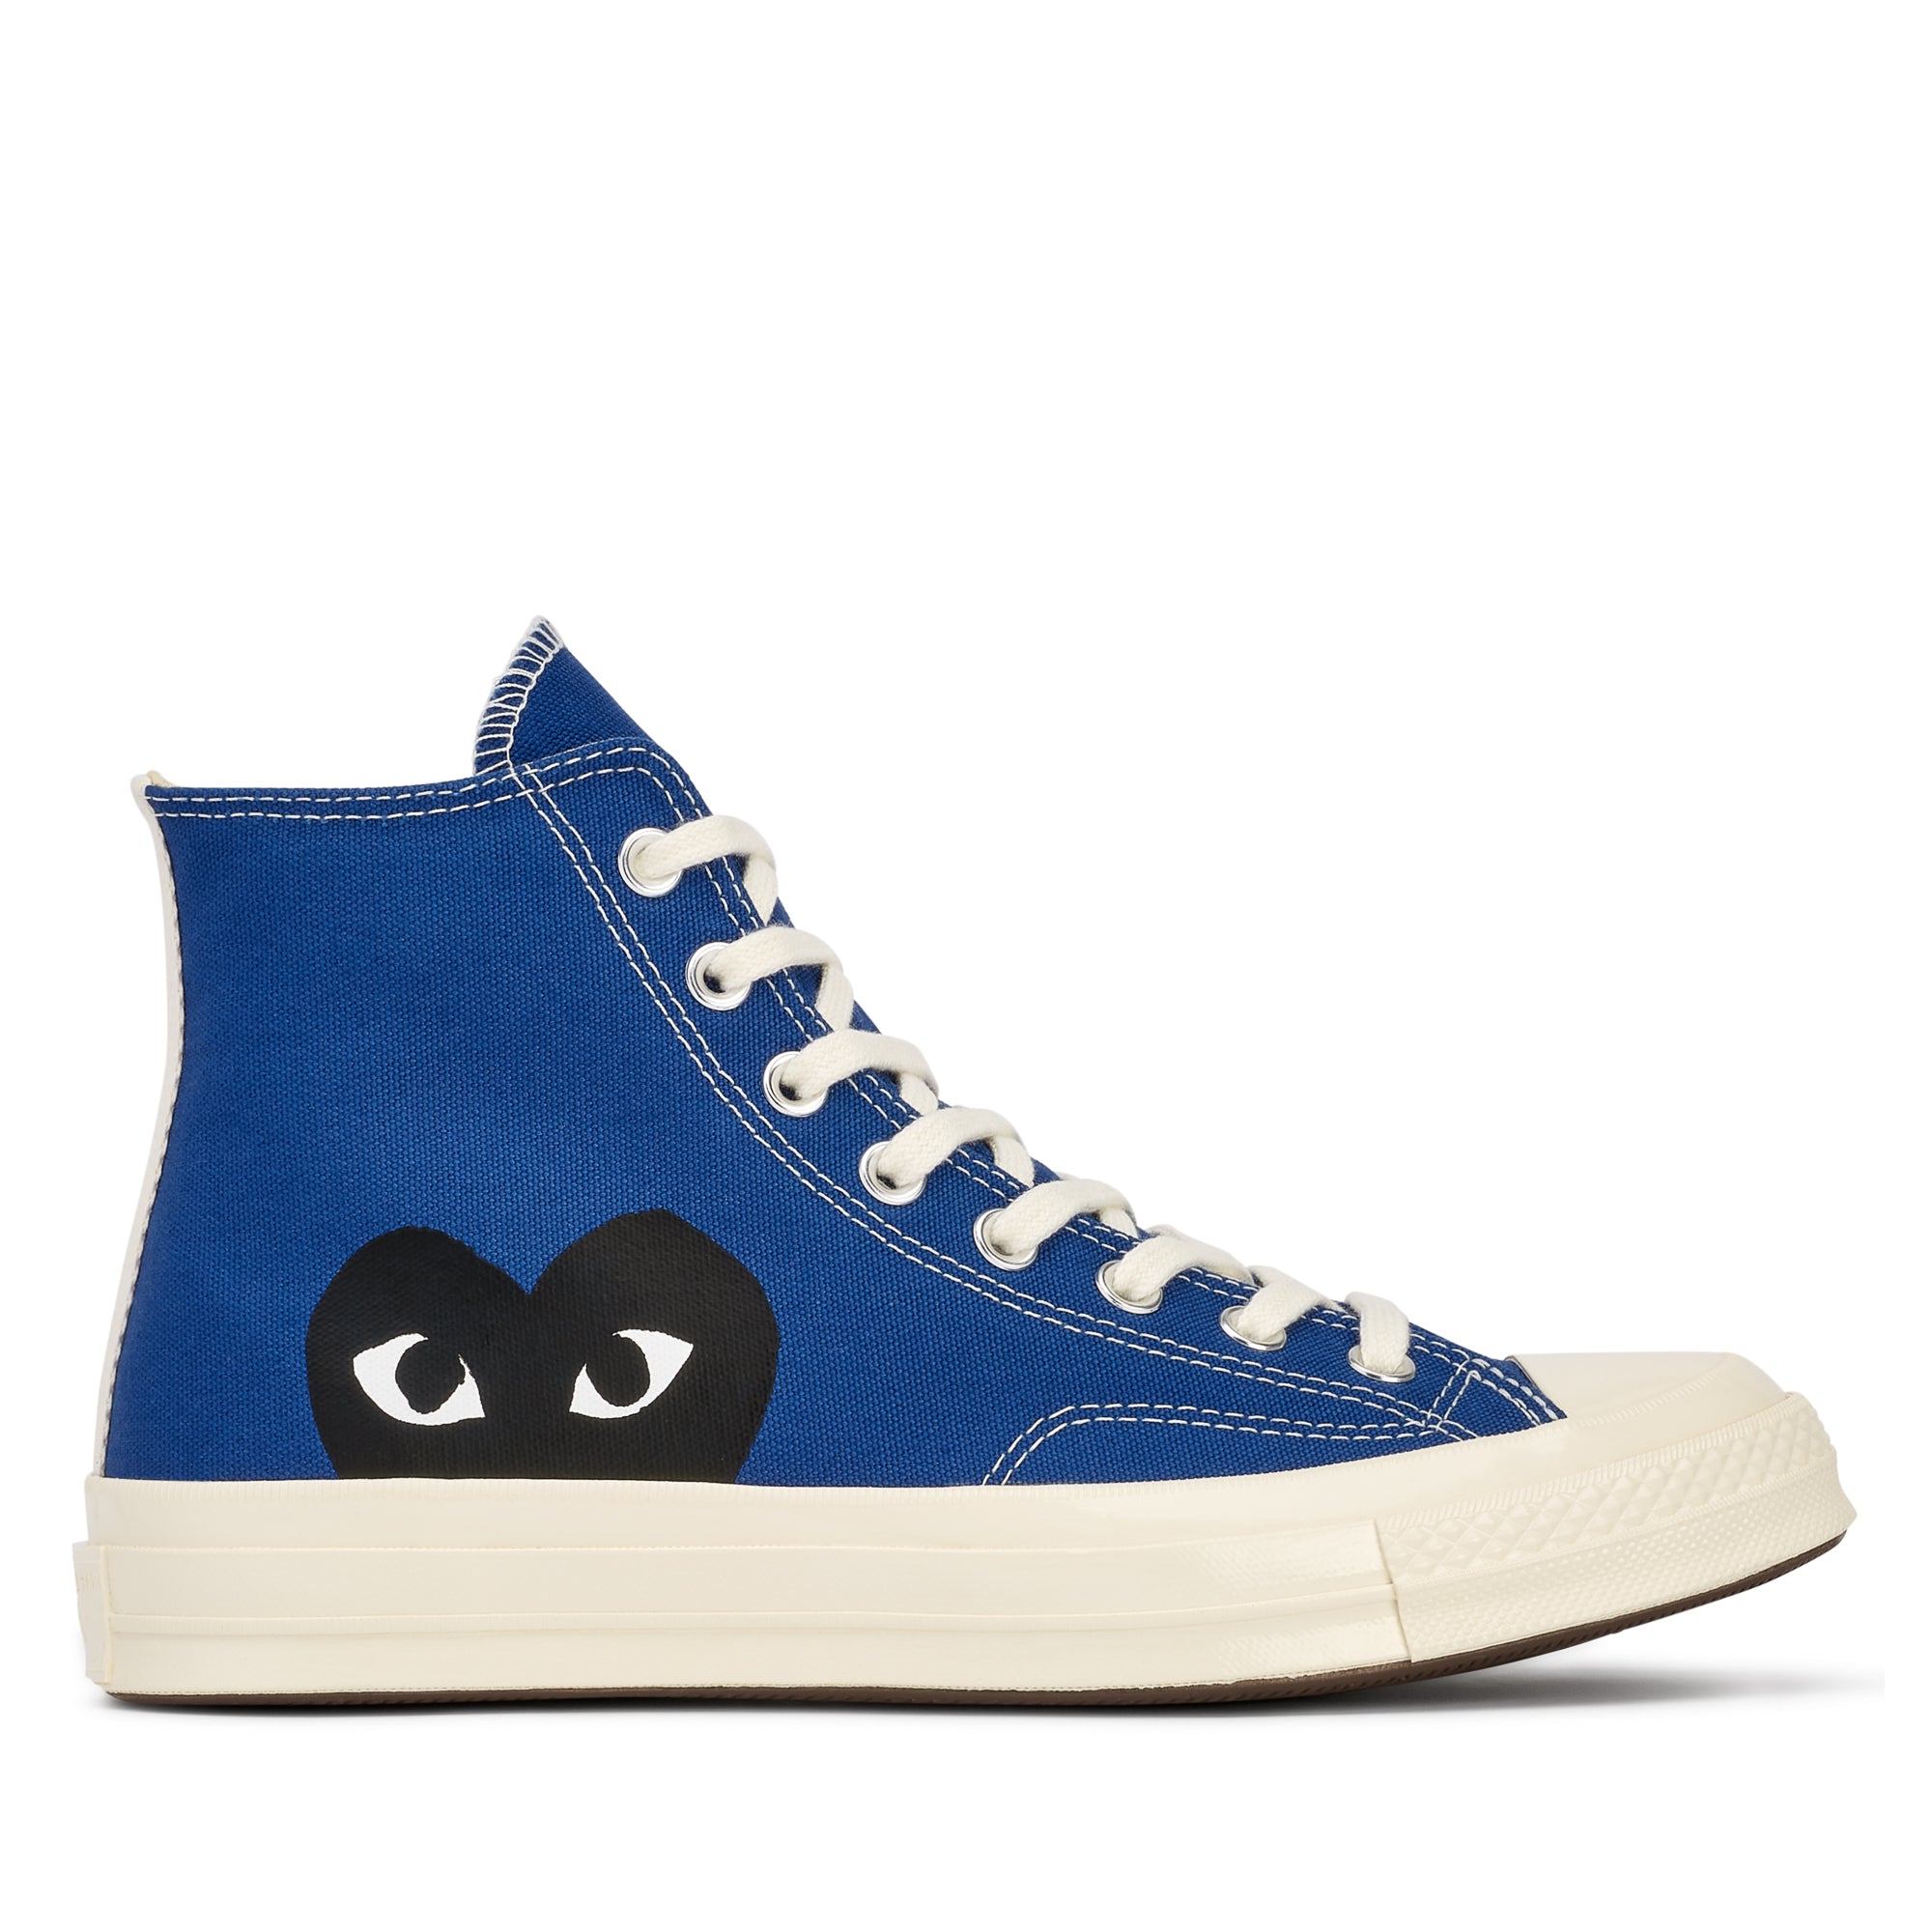 Play Converse - Black Heart Chuck Taylor All Star ’70 High Sneakers - (Blue) view 1